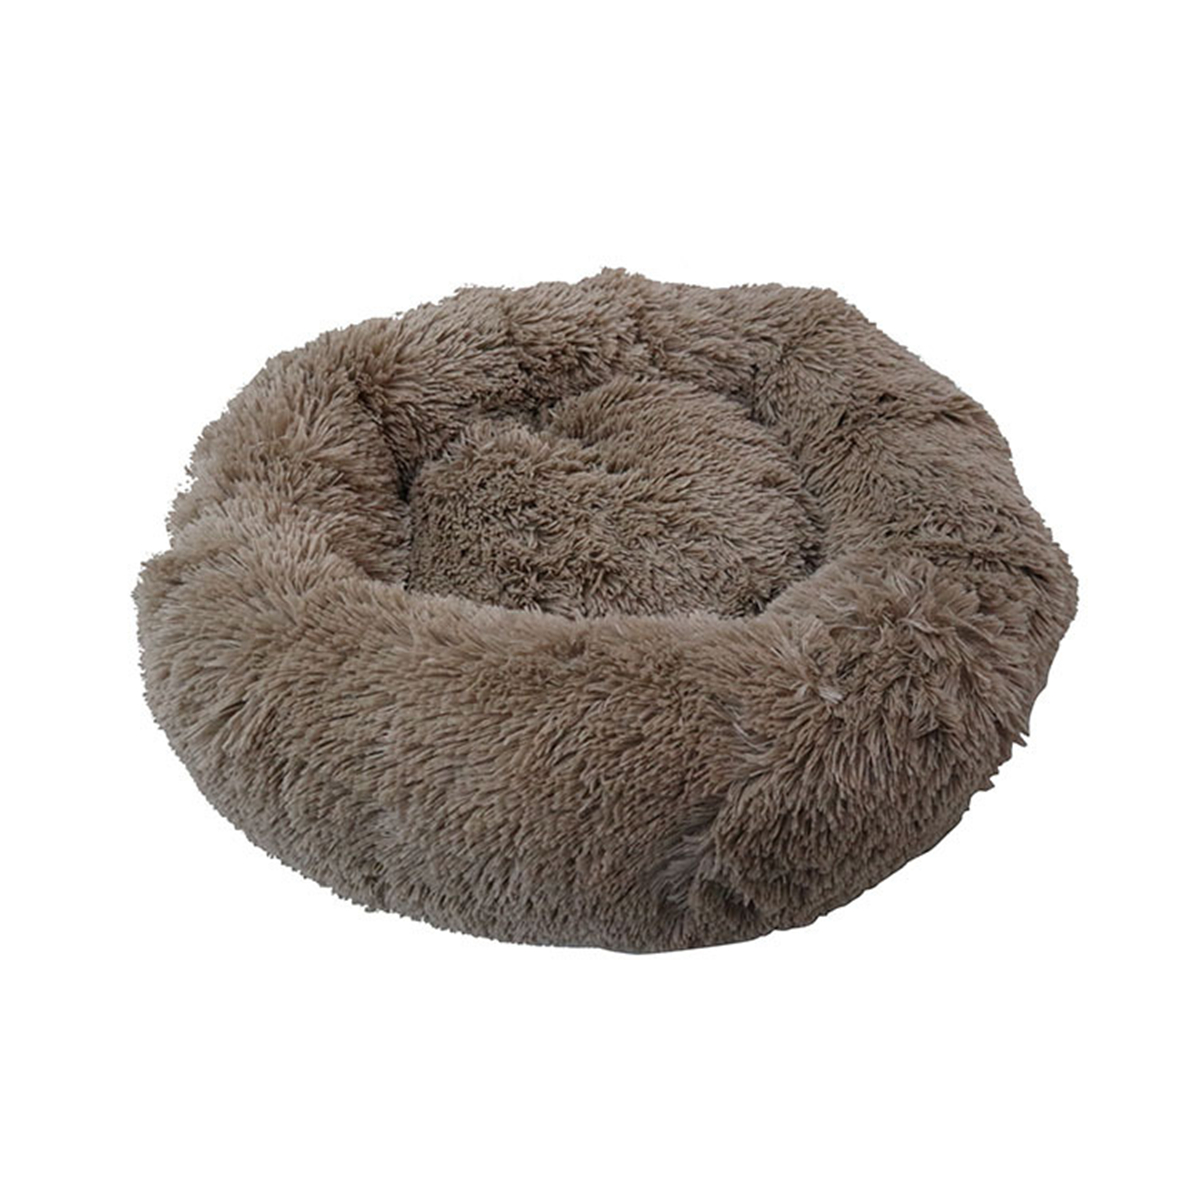 4-Size-Dog-Cat-Round-Bed-Sleeping-Bed-Plush-Pet-Bed-Kennel-Sleeping-Cushion-Puppy-1475650-2